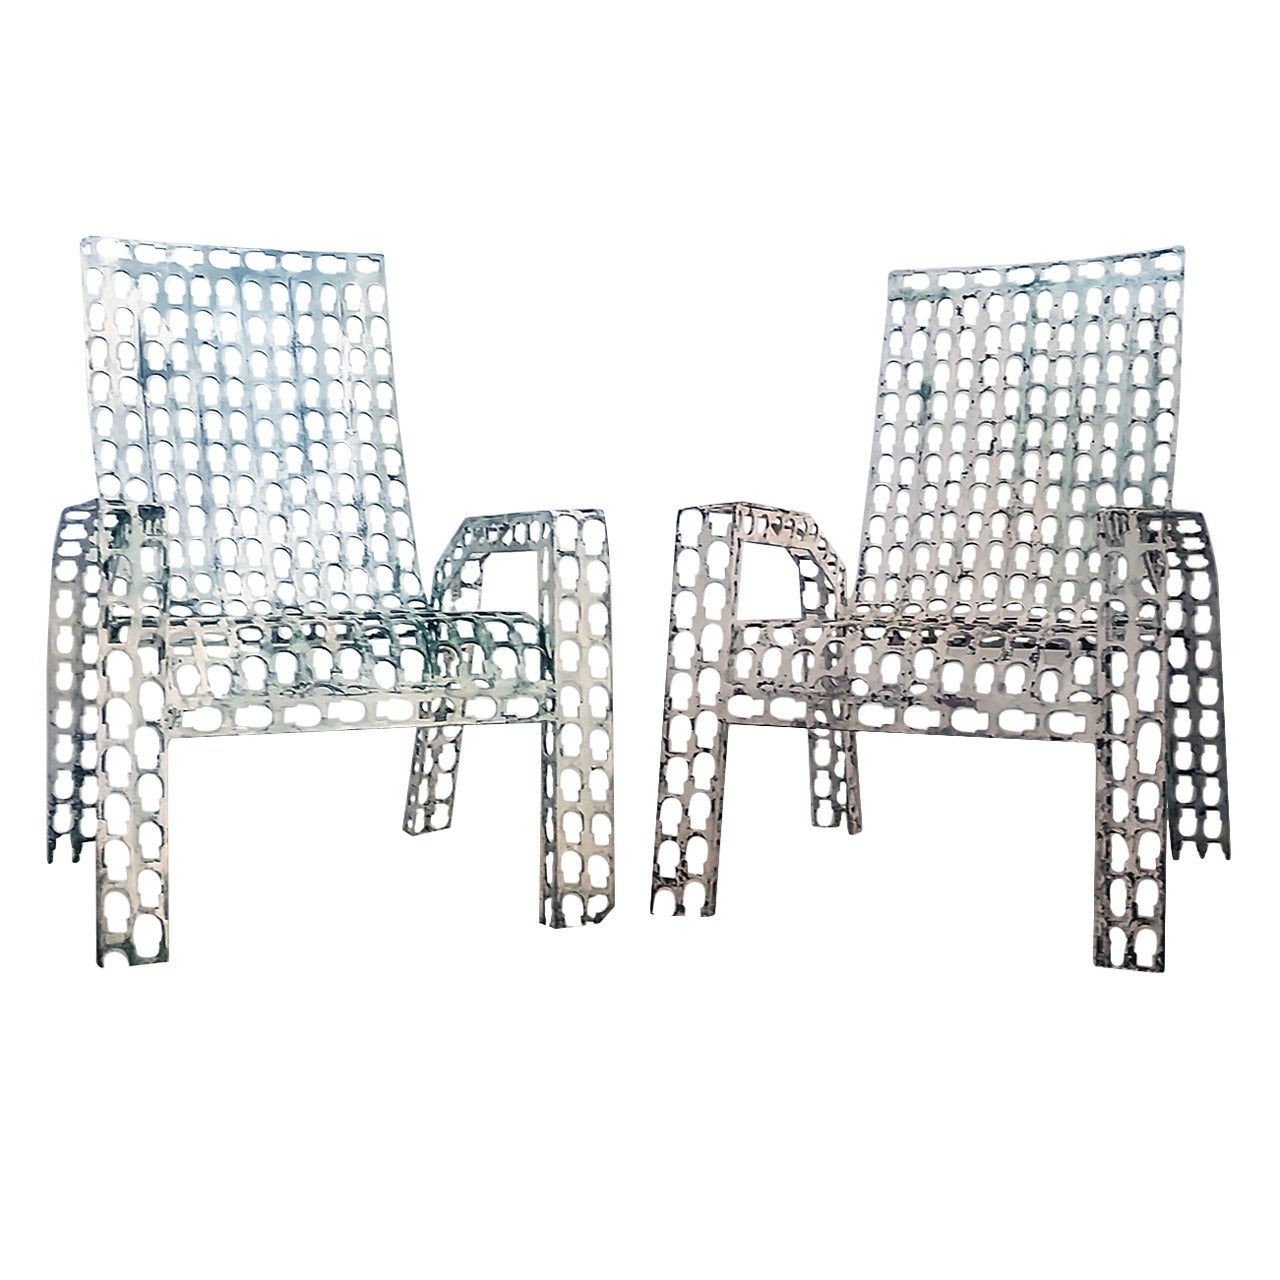 Folk Art Pressed and Welded Steel Lounge Chairs